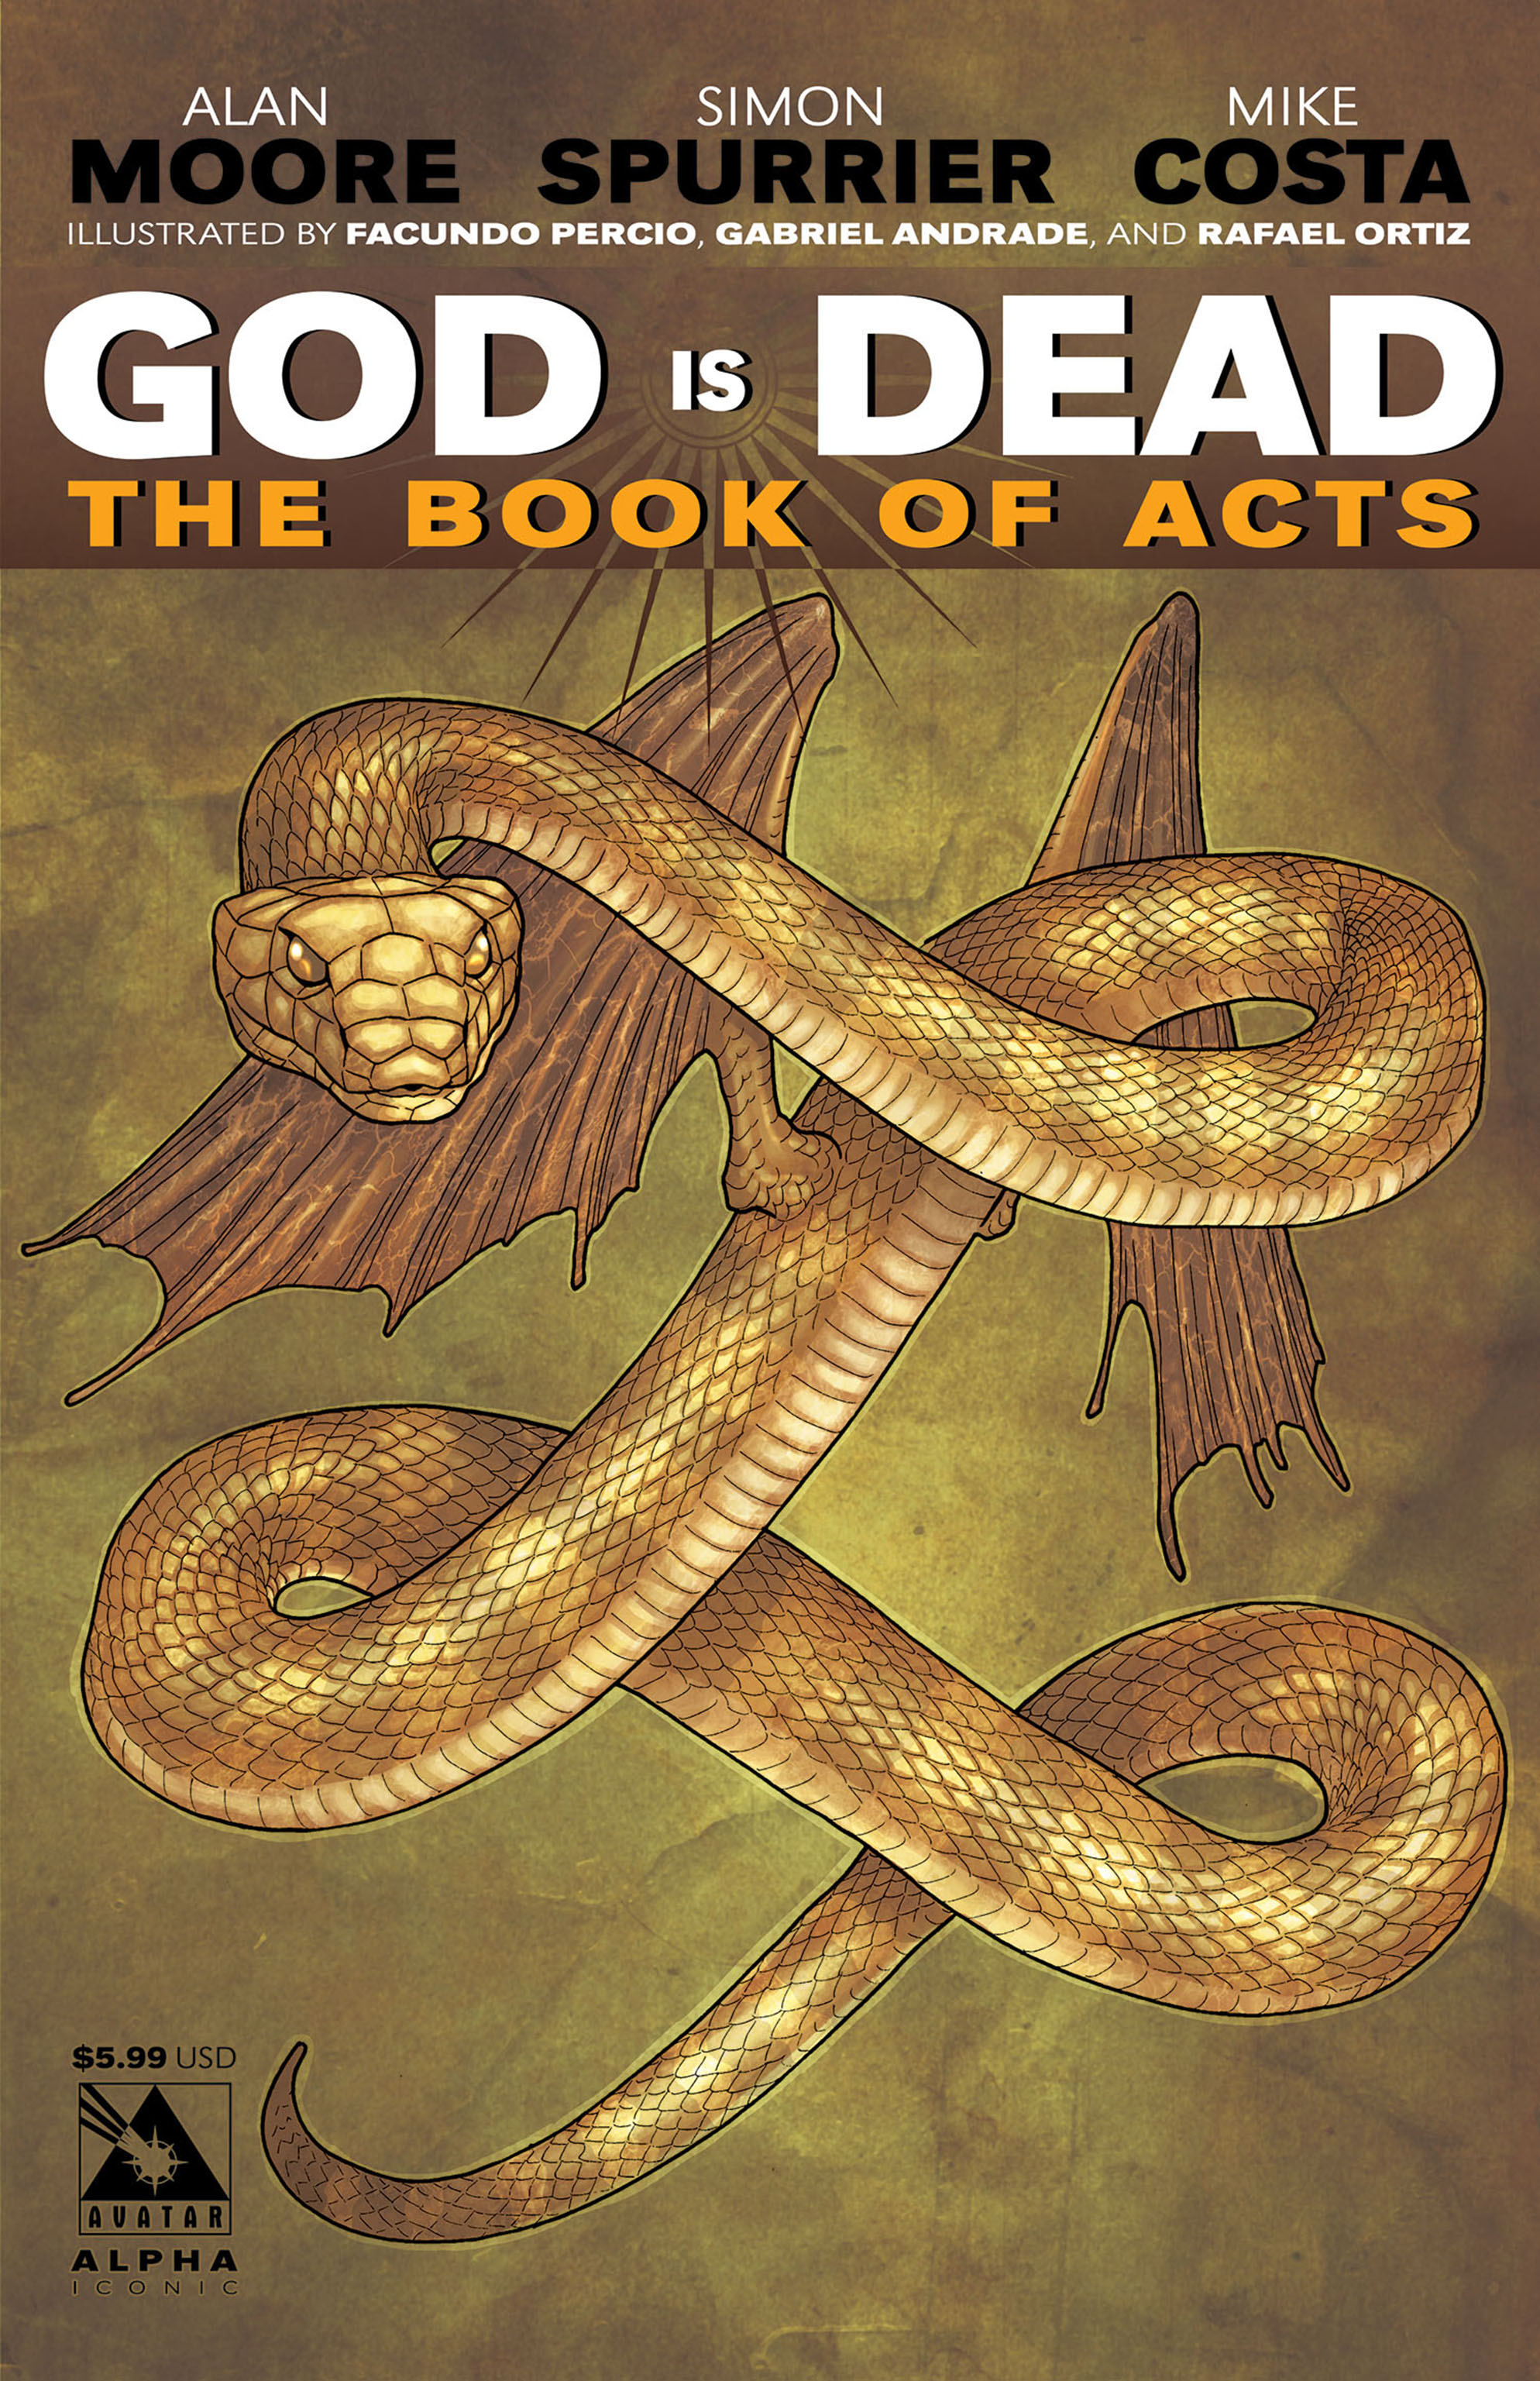 Read online God is Dead: Book of Acts comic -  Issue # Alpha - 5